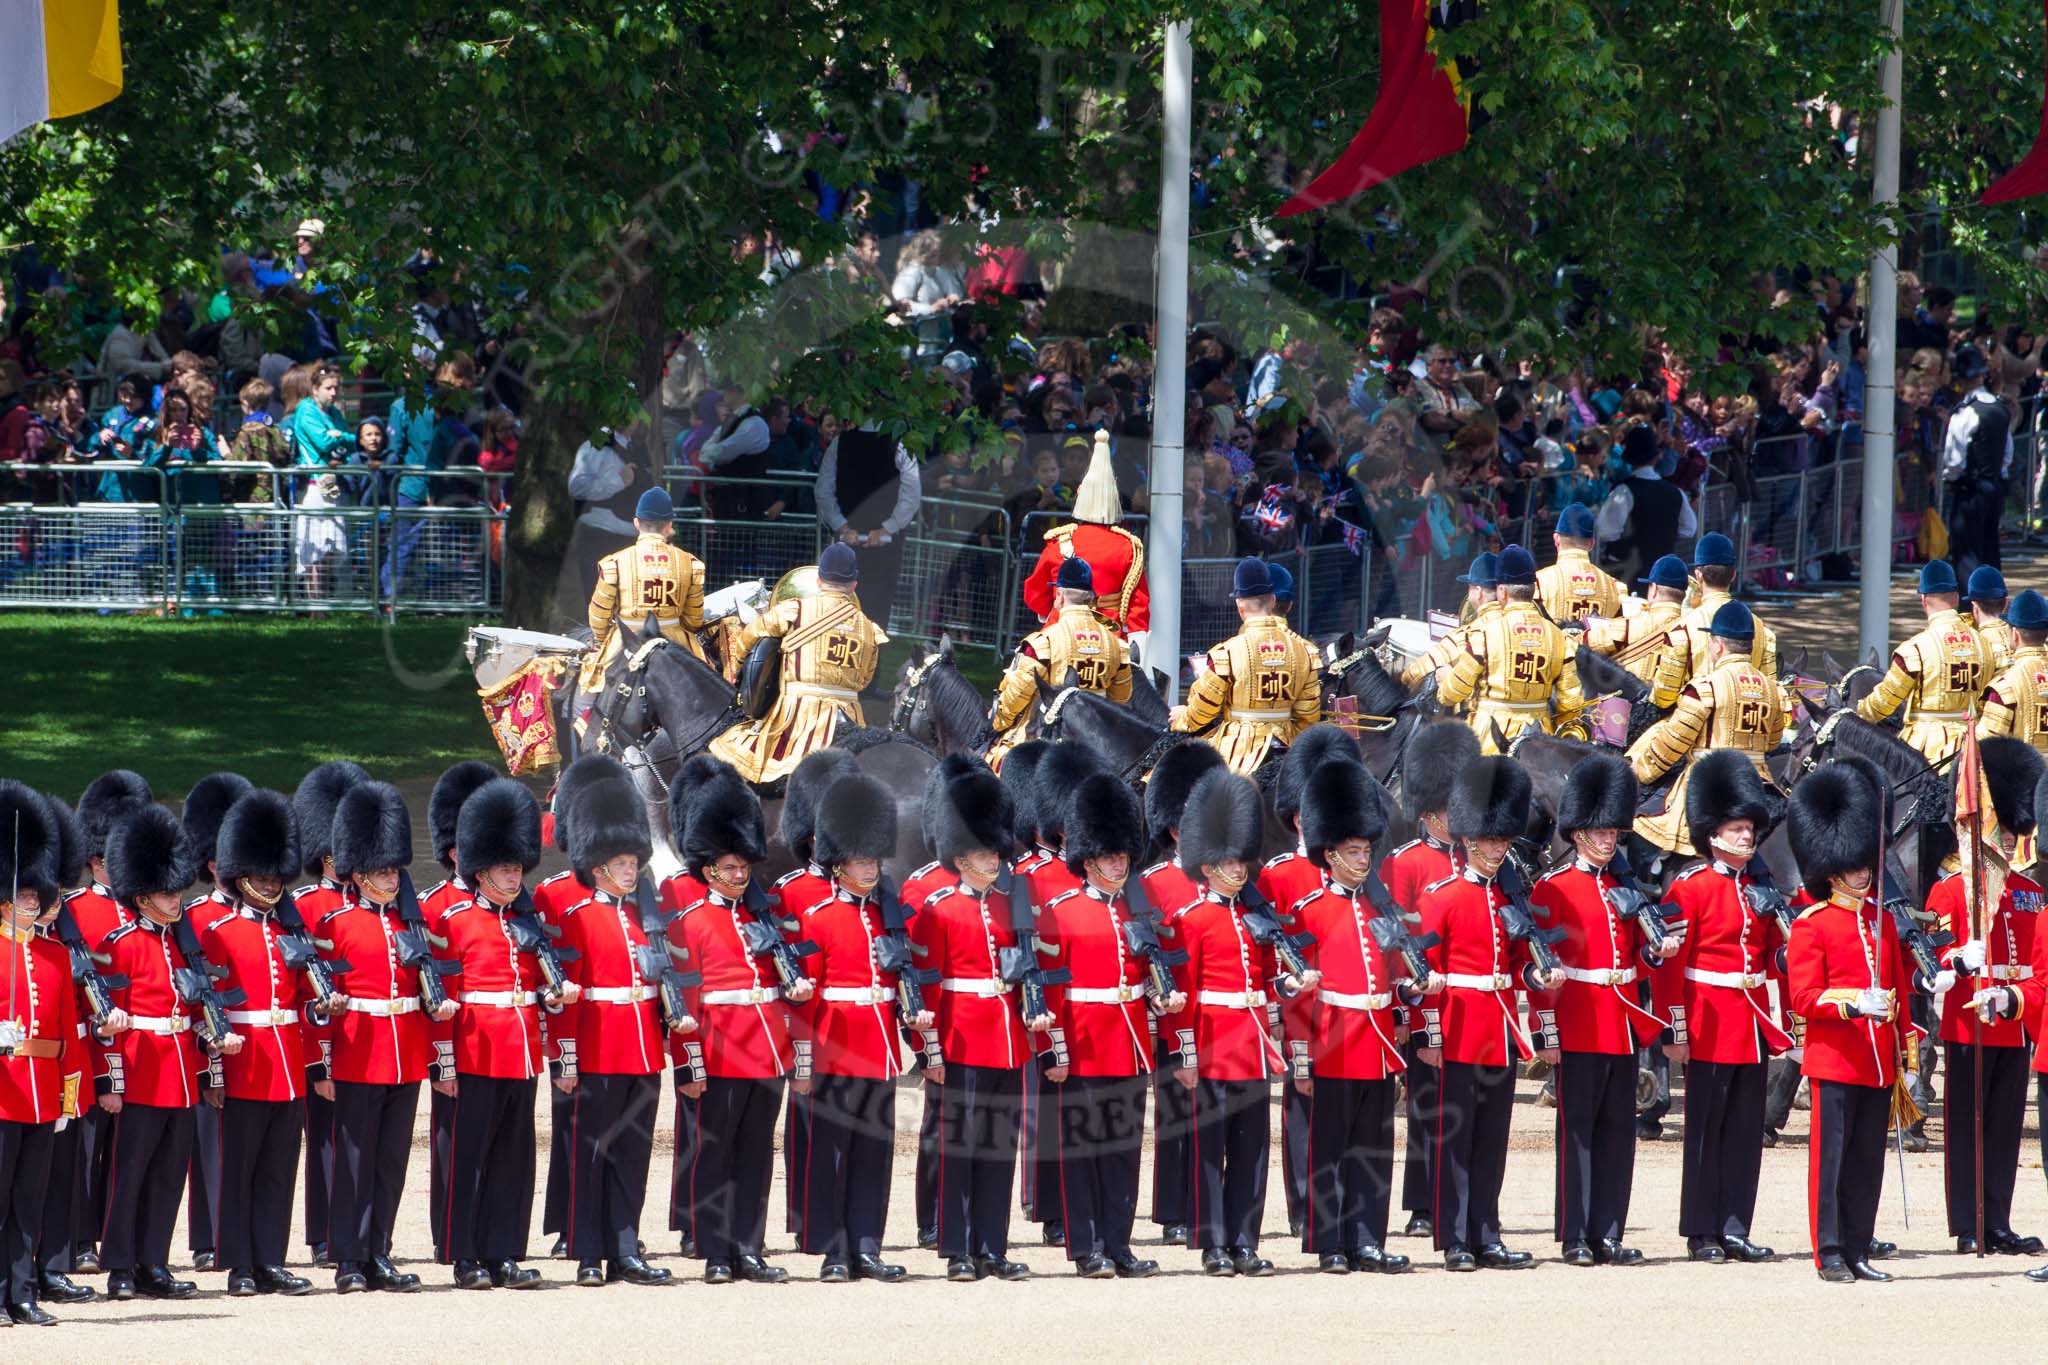 The Colonel's Review 2013: The Mounted Bands of the Household Cavalry are ready to leave, they follow the Royal Horse Artillery to march off via The Mall..
Horse Guards Parade, Westminster,
London SW1,

United Kingdom,
on 08 June 2013 at 12:02, image #806